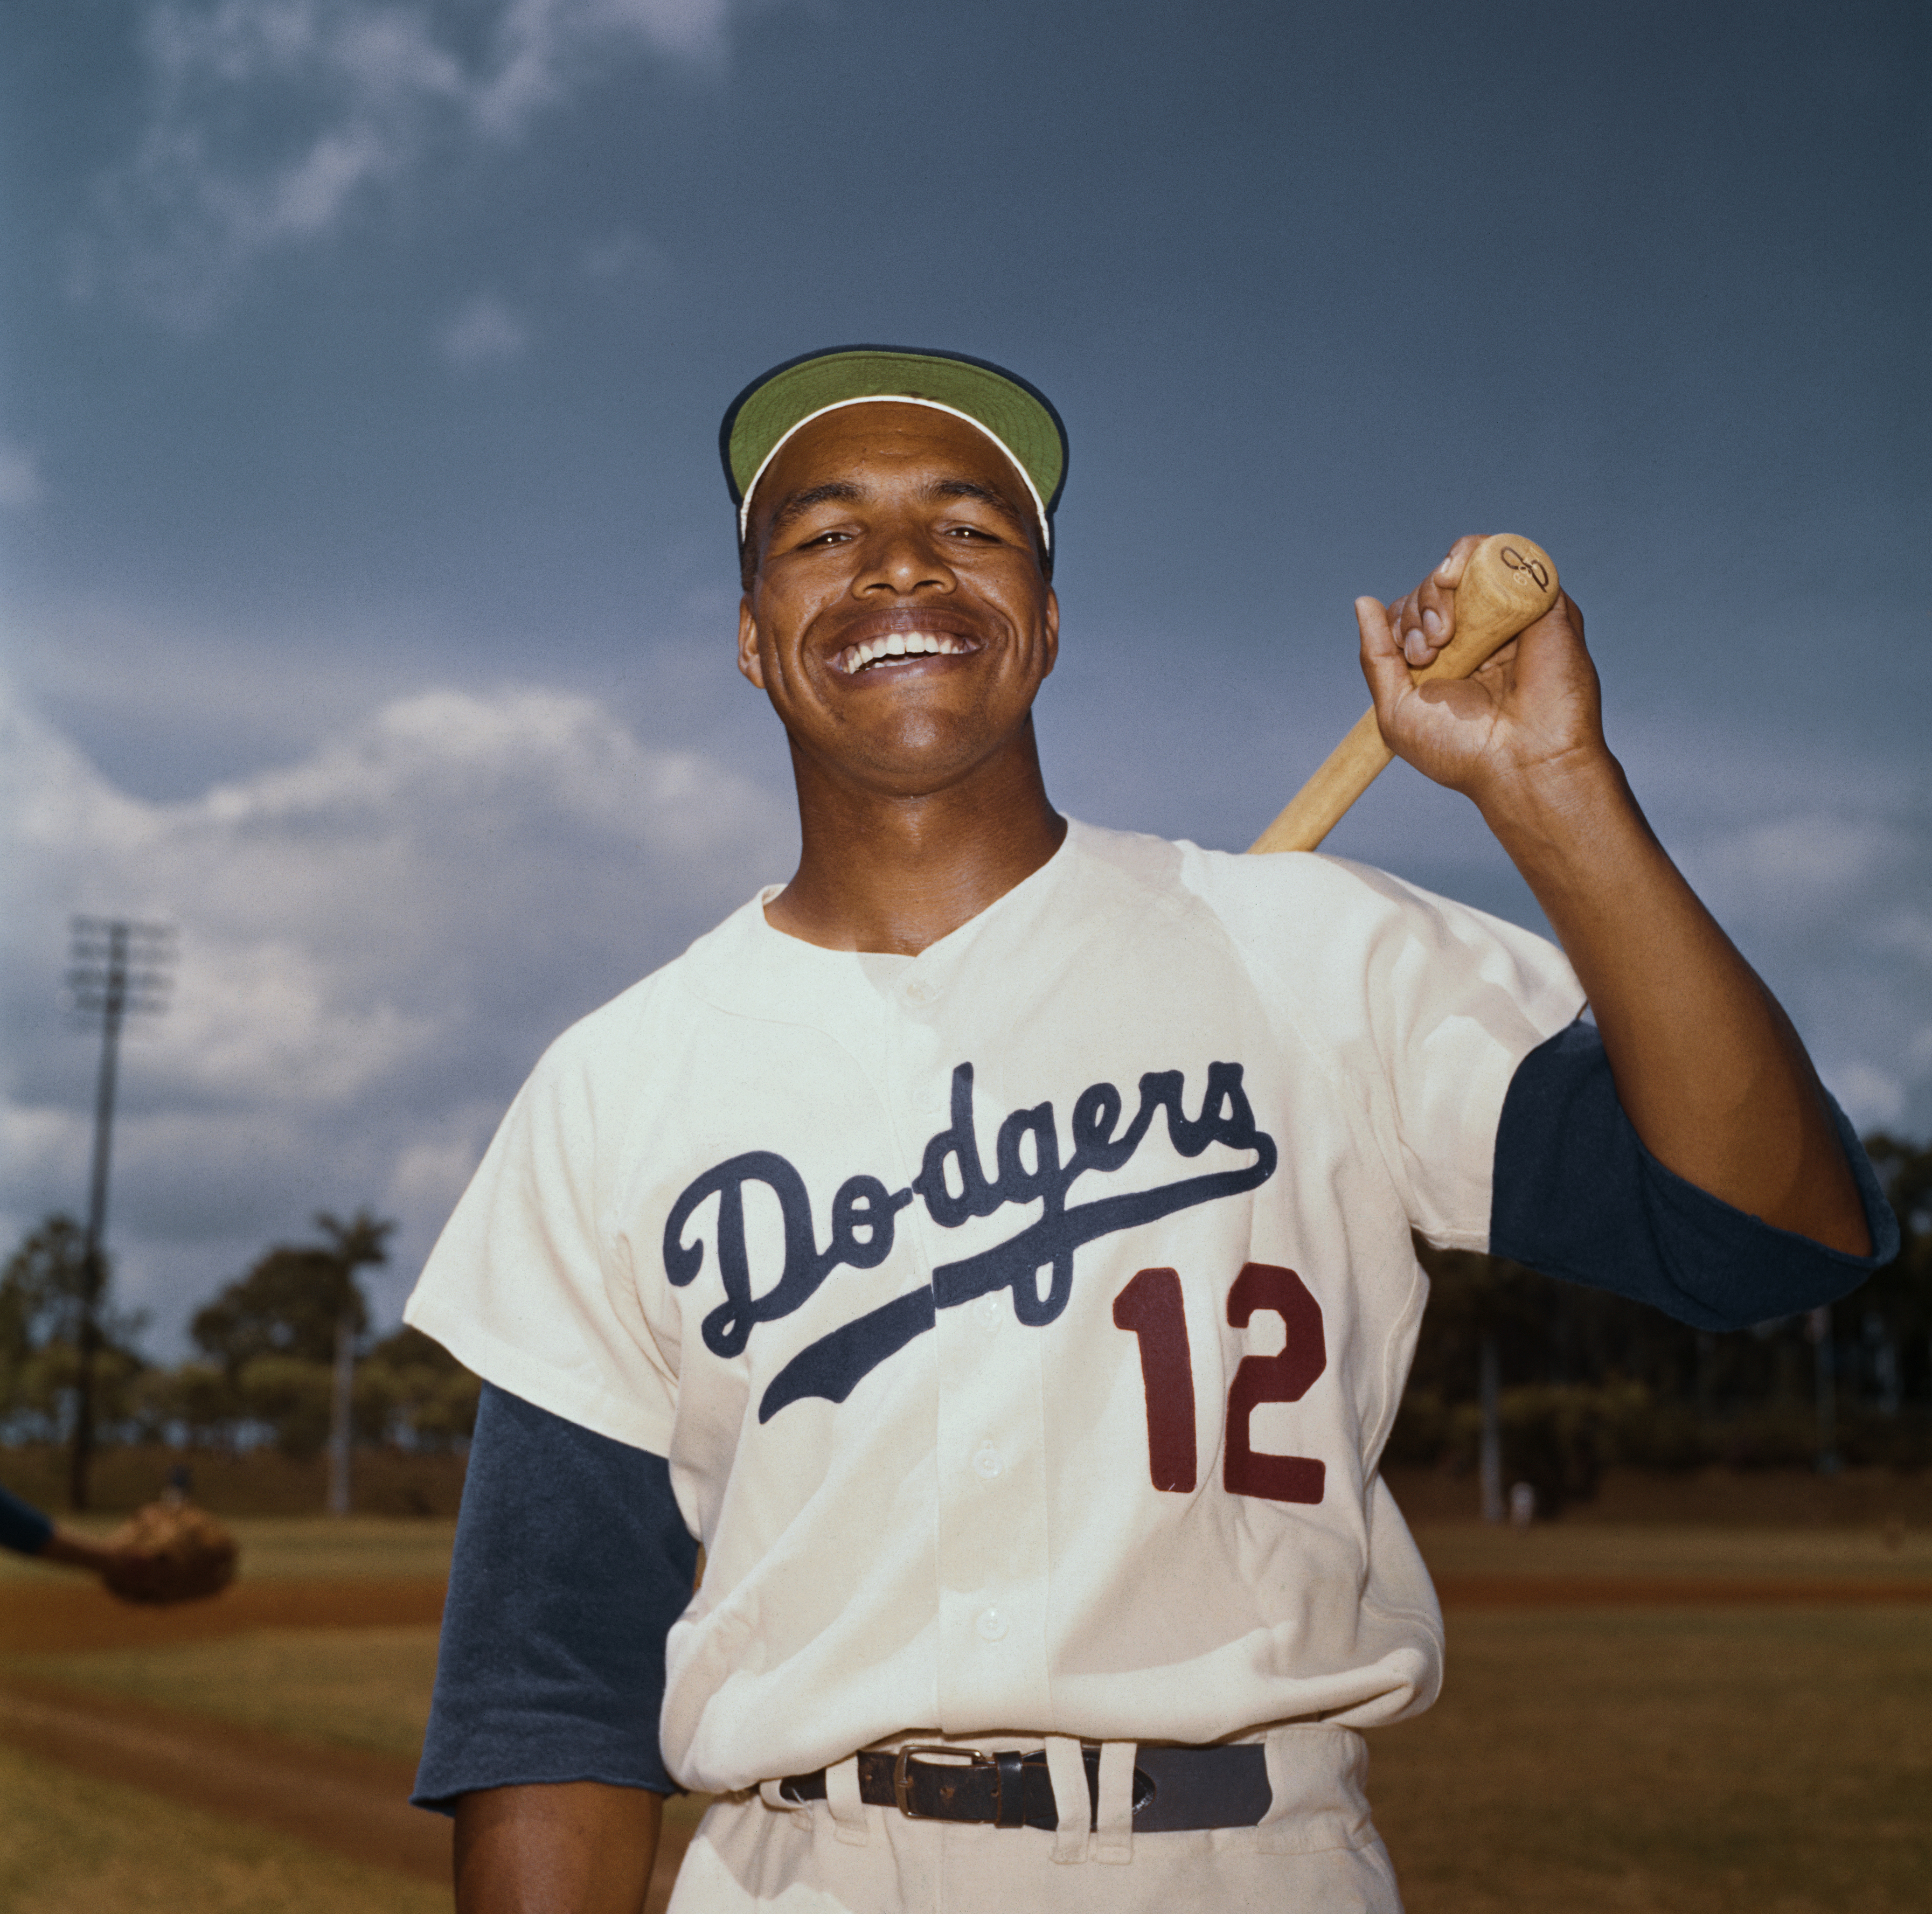 Tommy Davis won a National League batting title in 1962 with won of the best seasons in Dodgers history. He started off 1963 with a thigh injury in spring training but that didn’t prevent him from a strong opening week of the regular season.